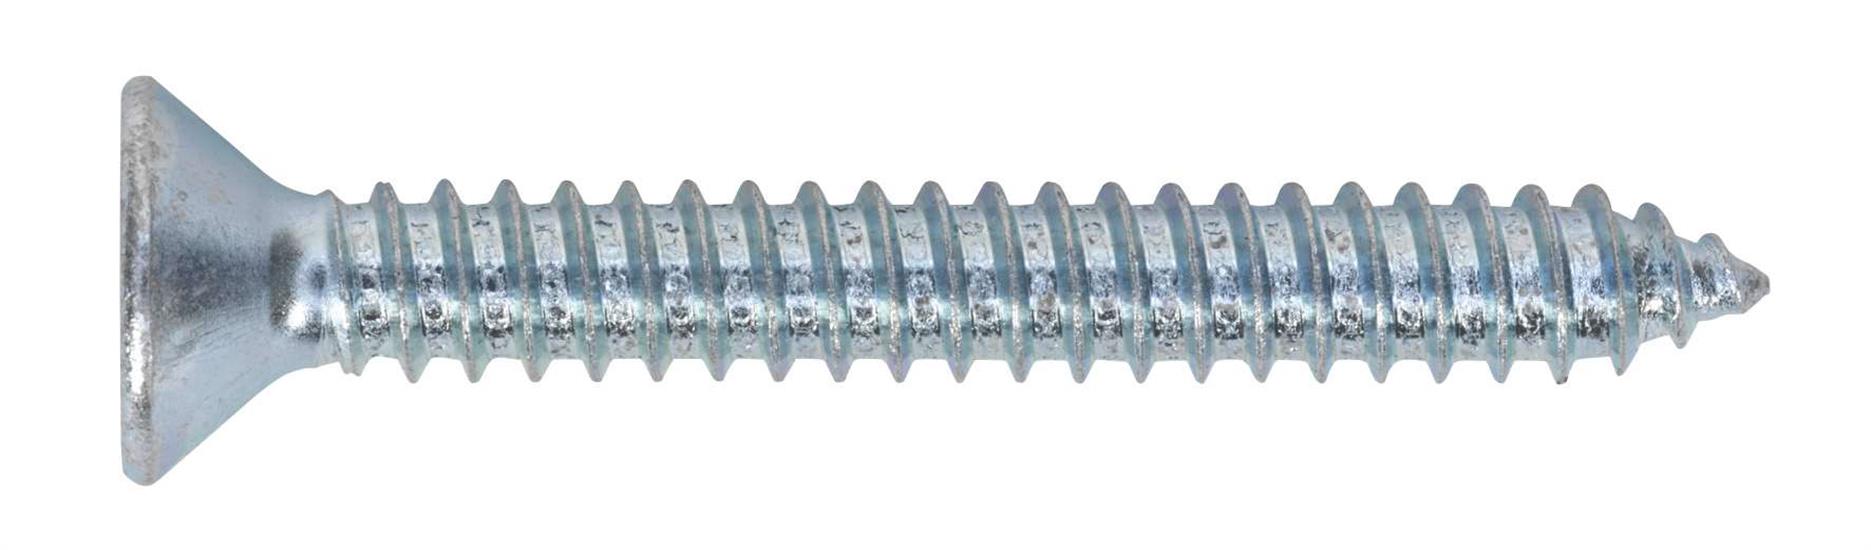 Sealey ST6351 - Self Tapping Screw 6.3 x 51mm Countersunk Pozi DIN 7982 Pack of 100